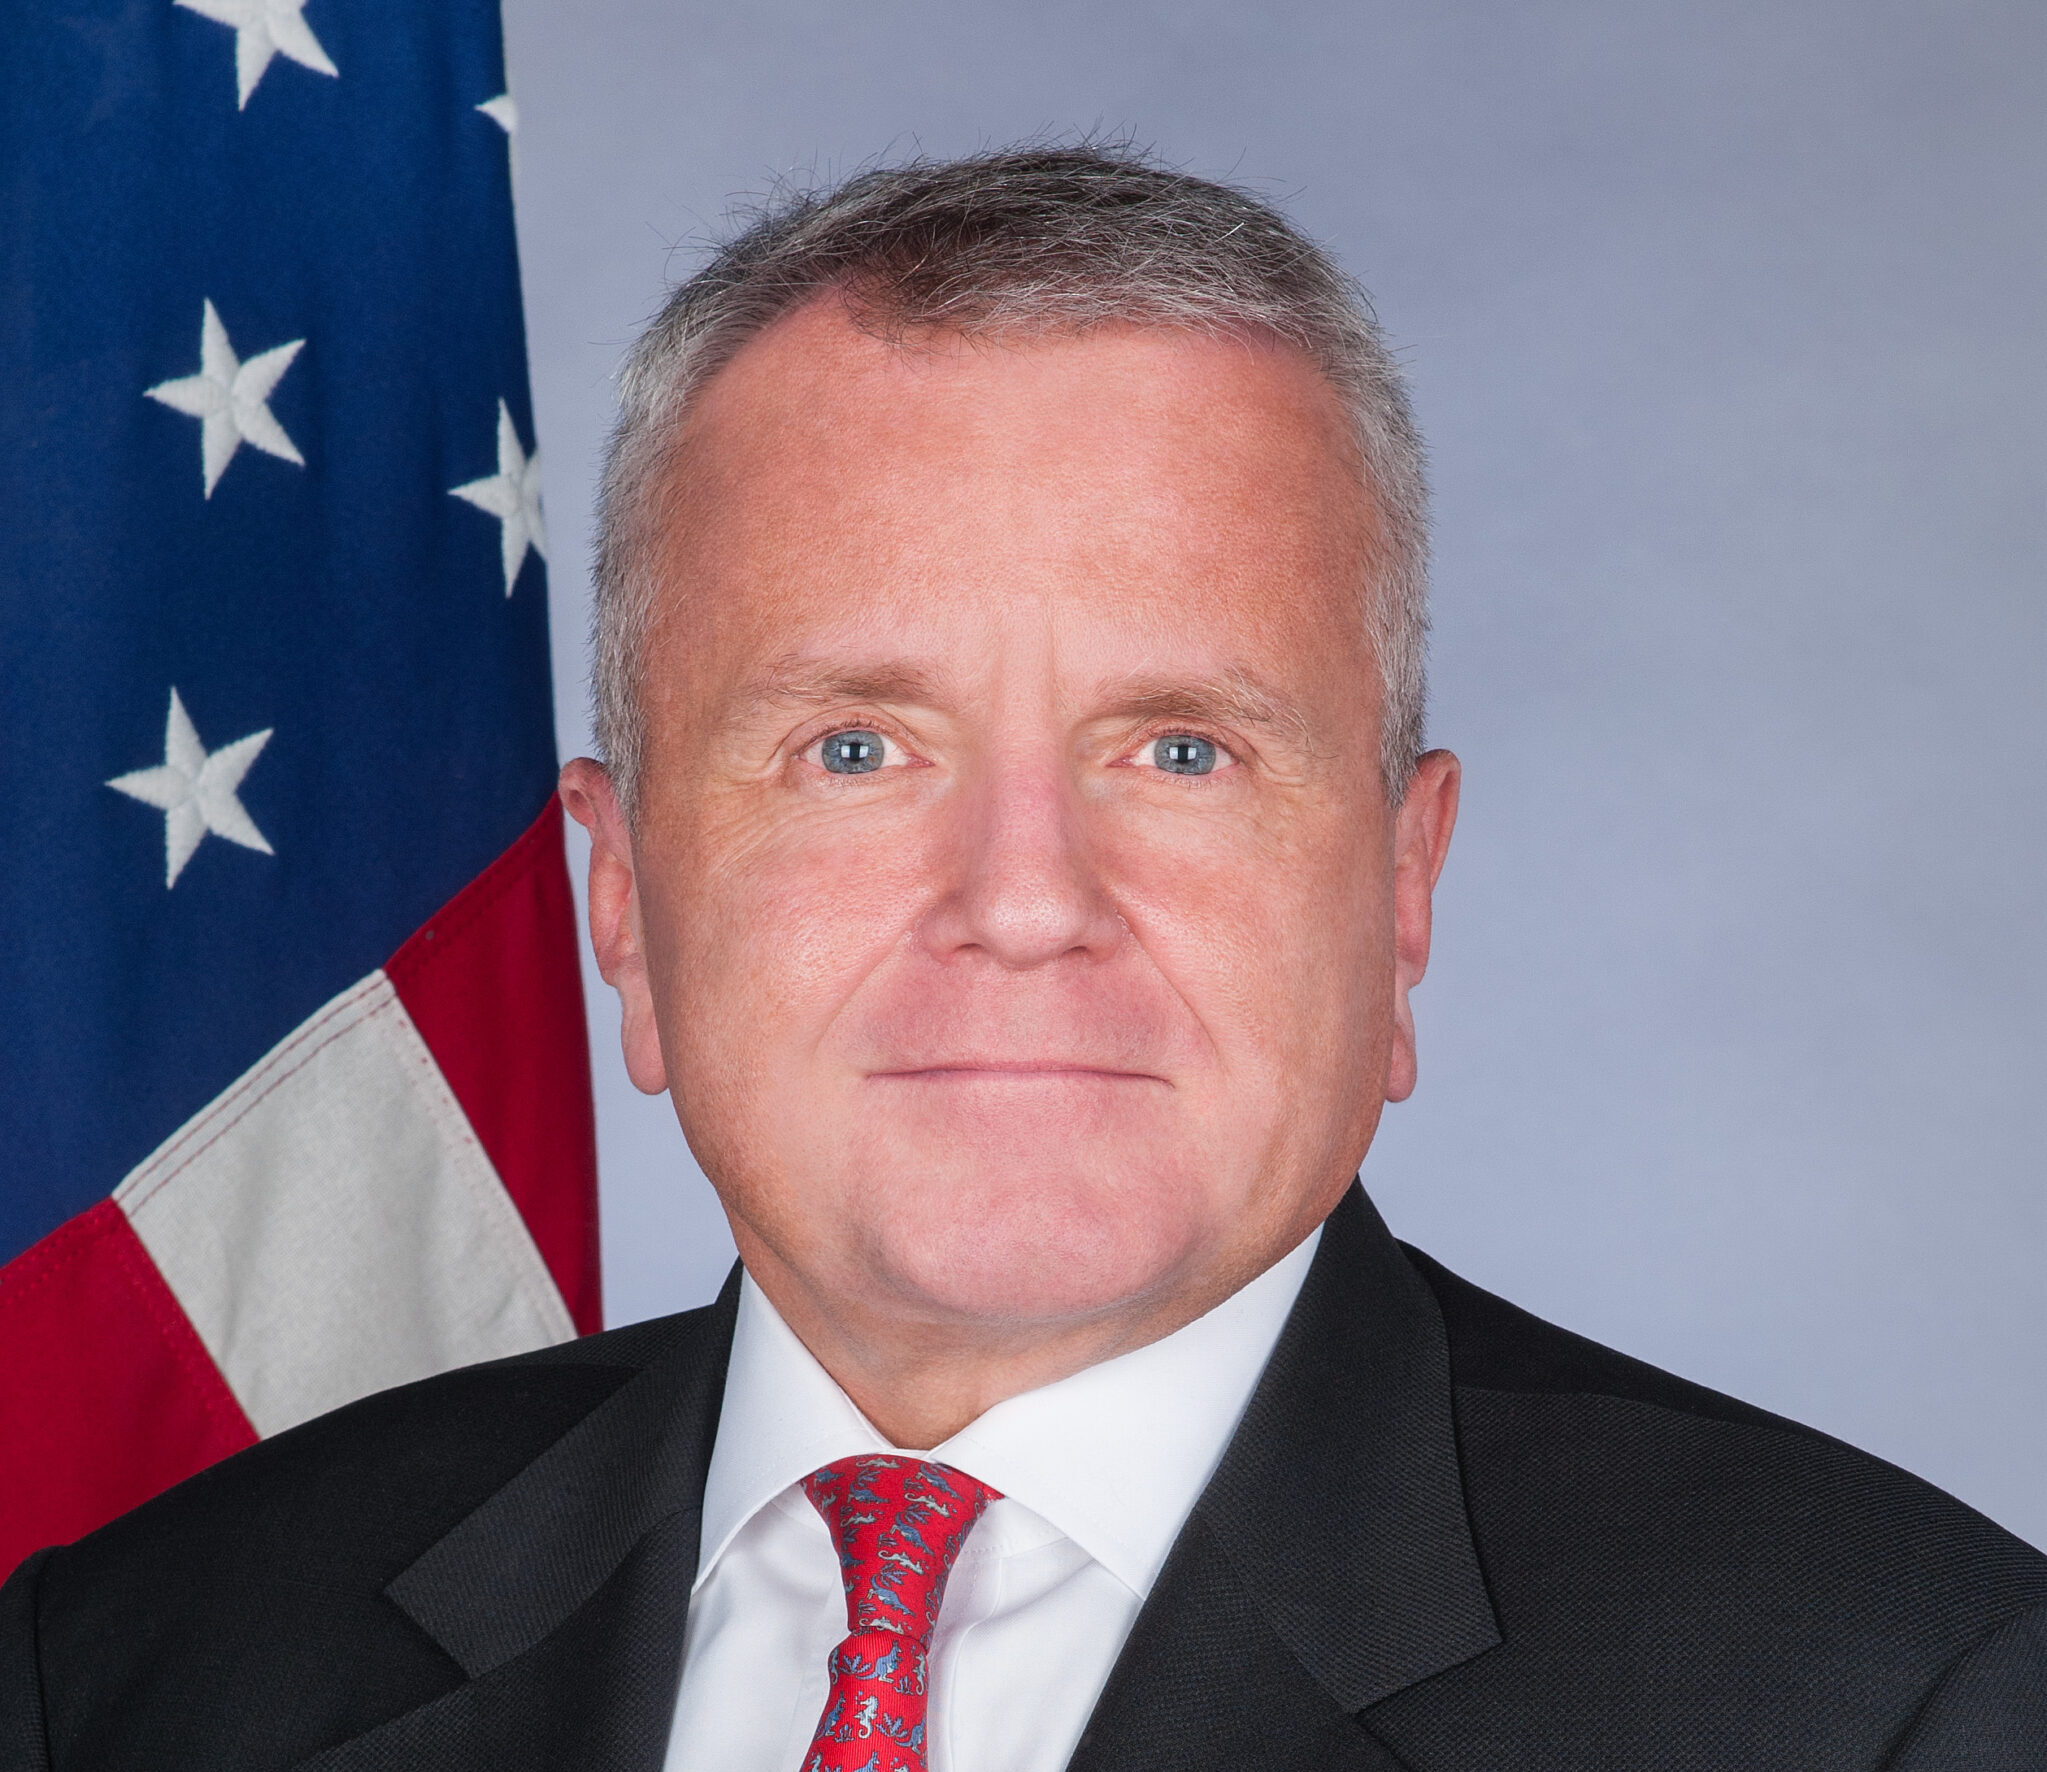 John Sullivan file image, adapted from image featured at usembassy.gov